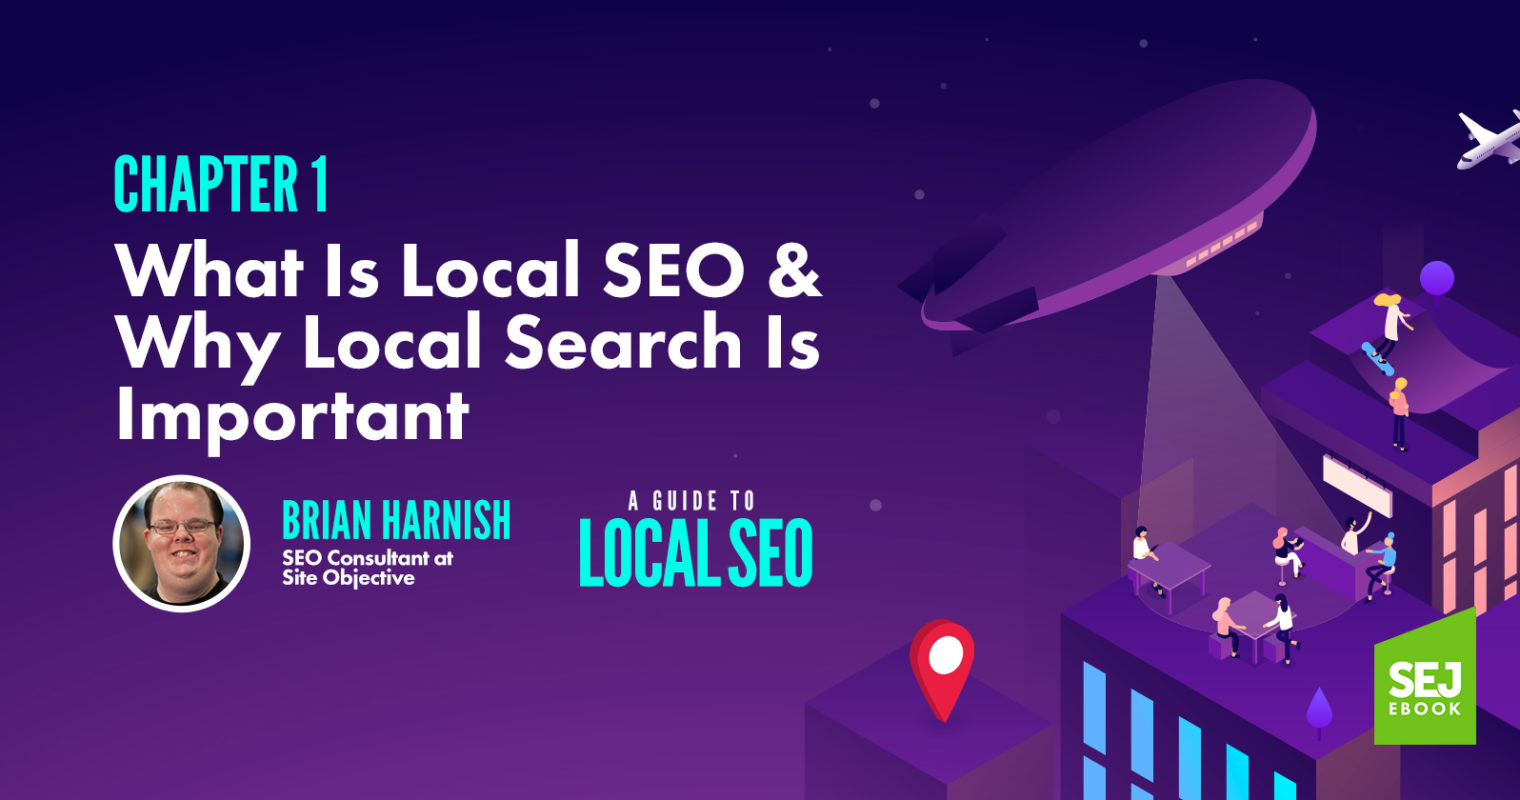 Local SEO guide by SEJ